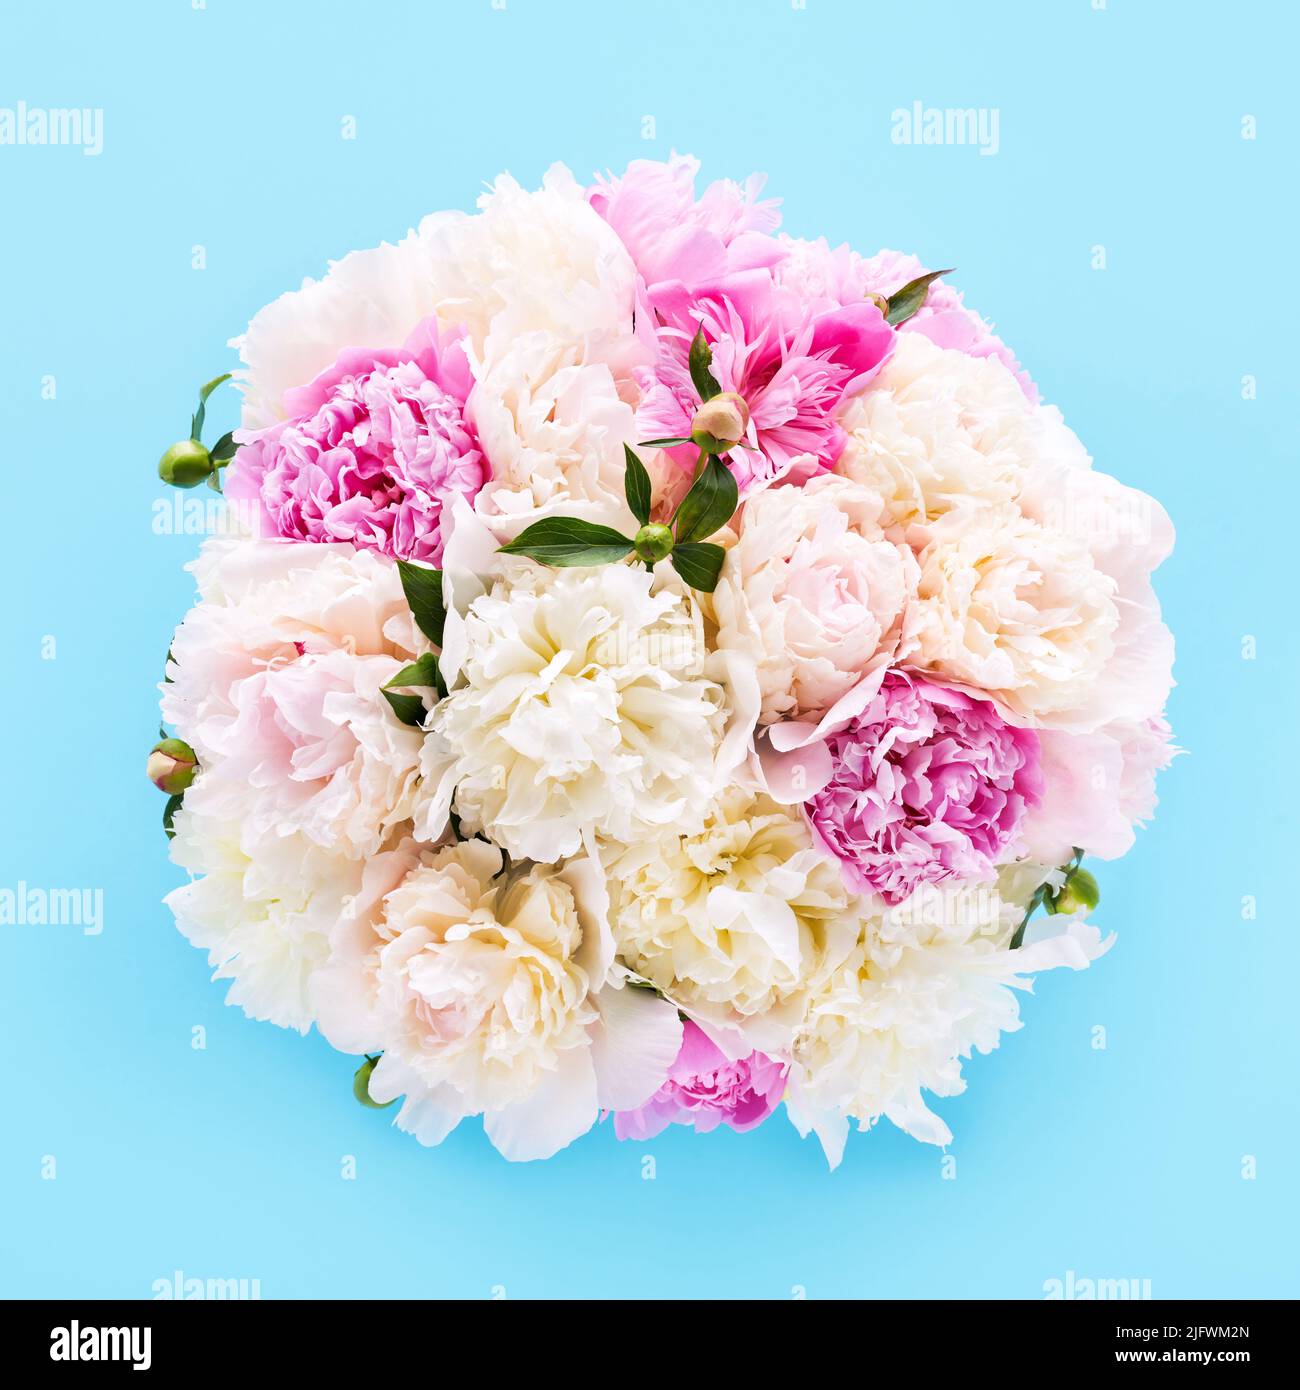 Bouquet of pink and white peonies on a light blue background. Birthday, Valentine's Day, Mother's Day, Women's day concept. Top view, soft focus Stock Photo